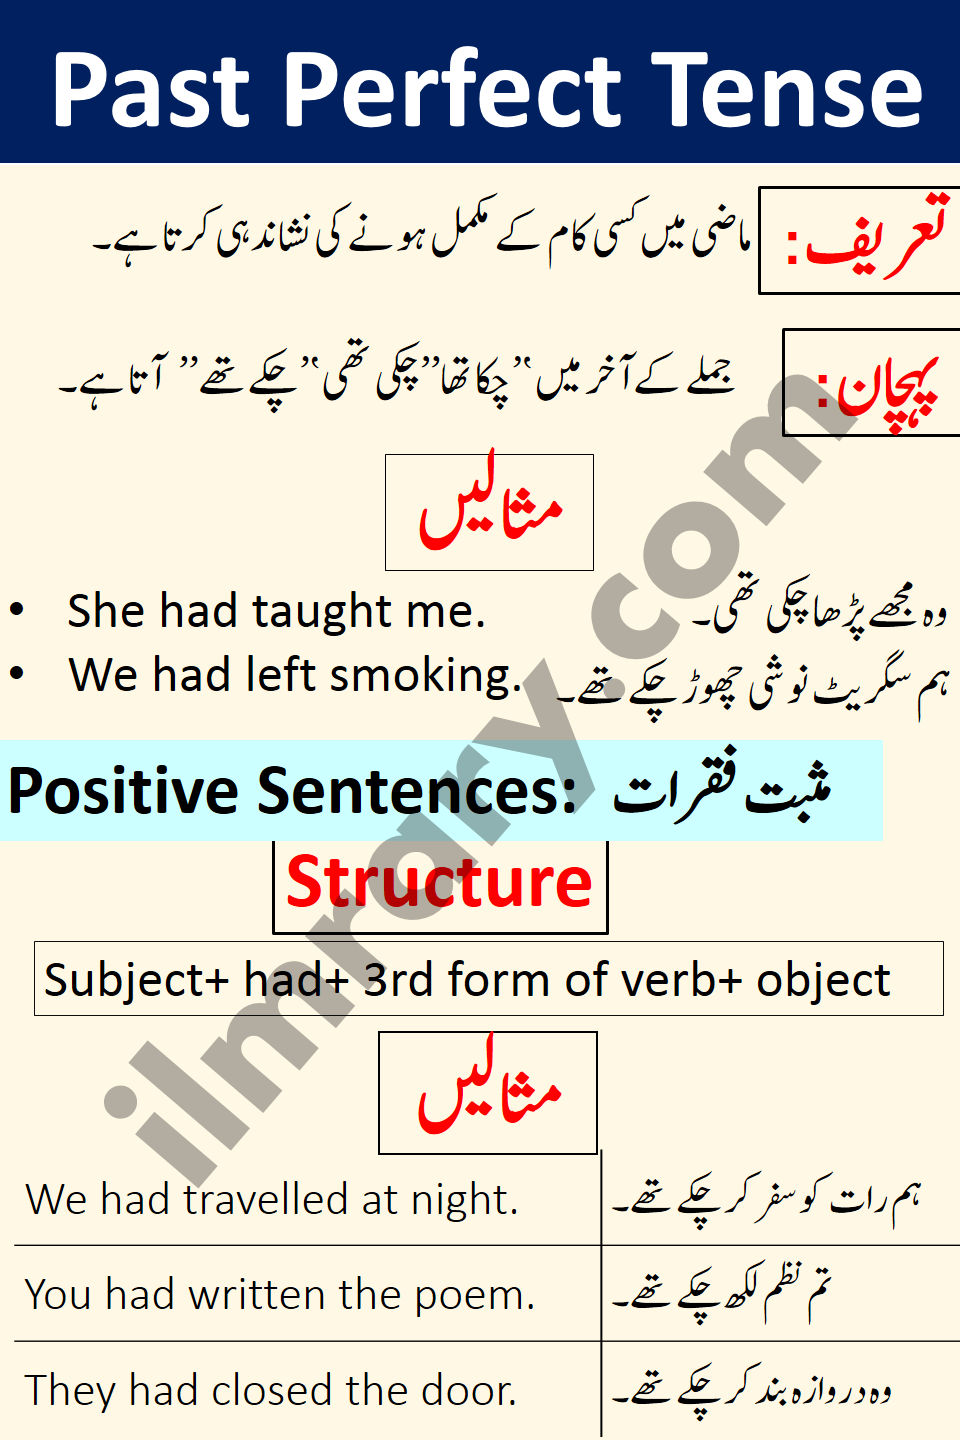 Positive Examples for Past Perfect Tense in Urdu